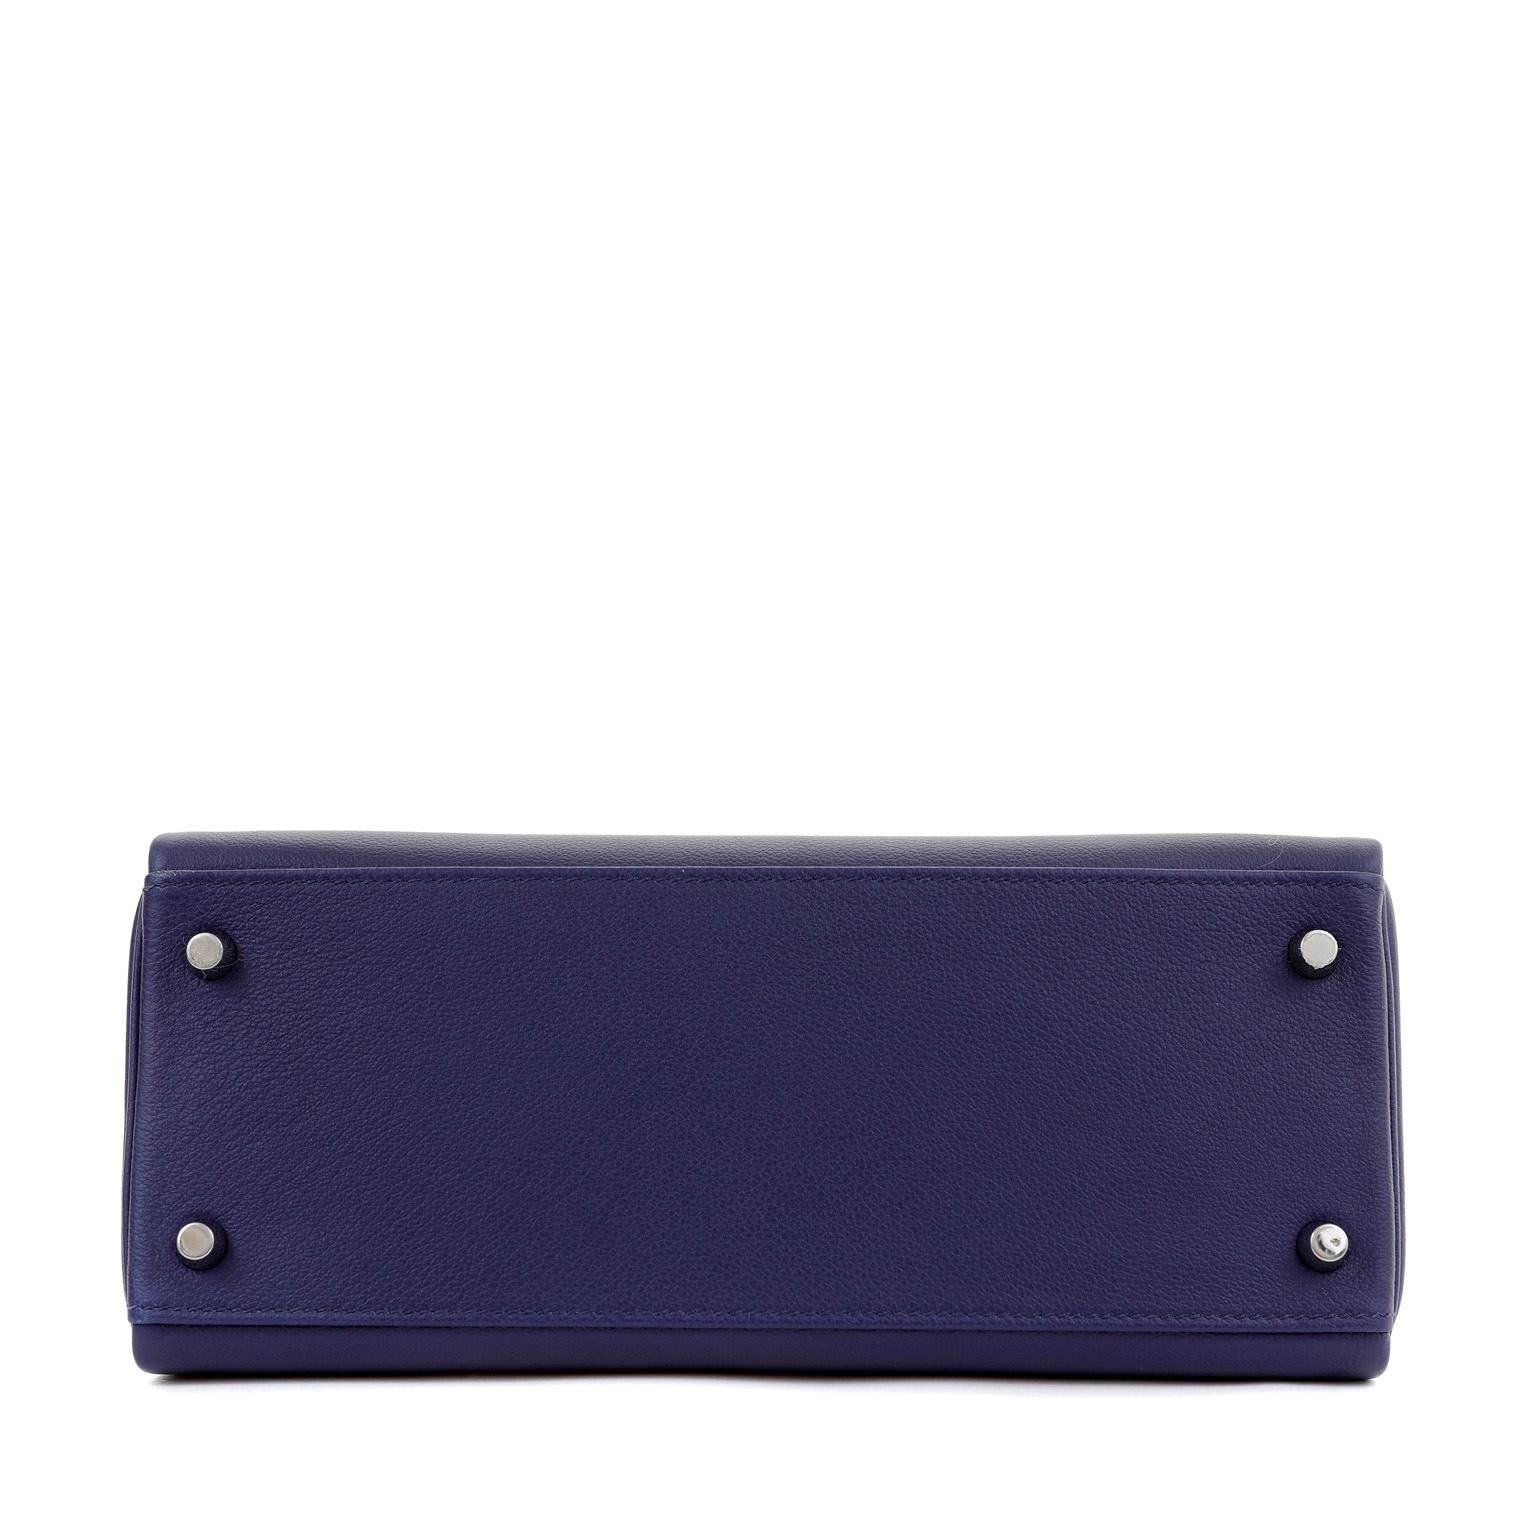 Hermès 28 cm Midnight Blue Epsom  Kelly Sellier with Violet Interior For Sale 1